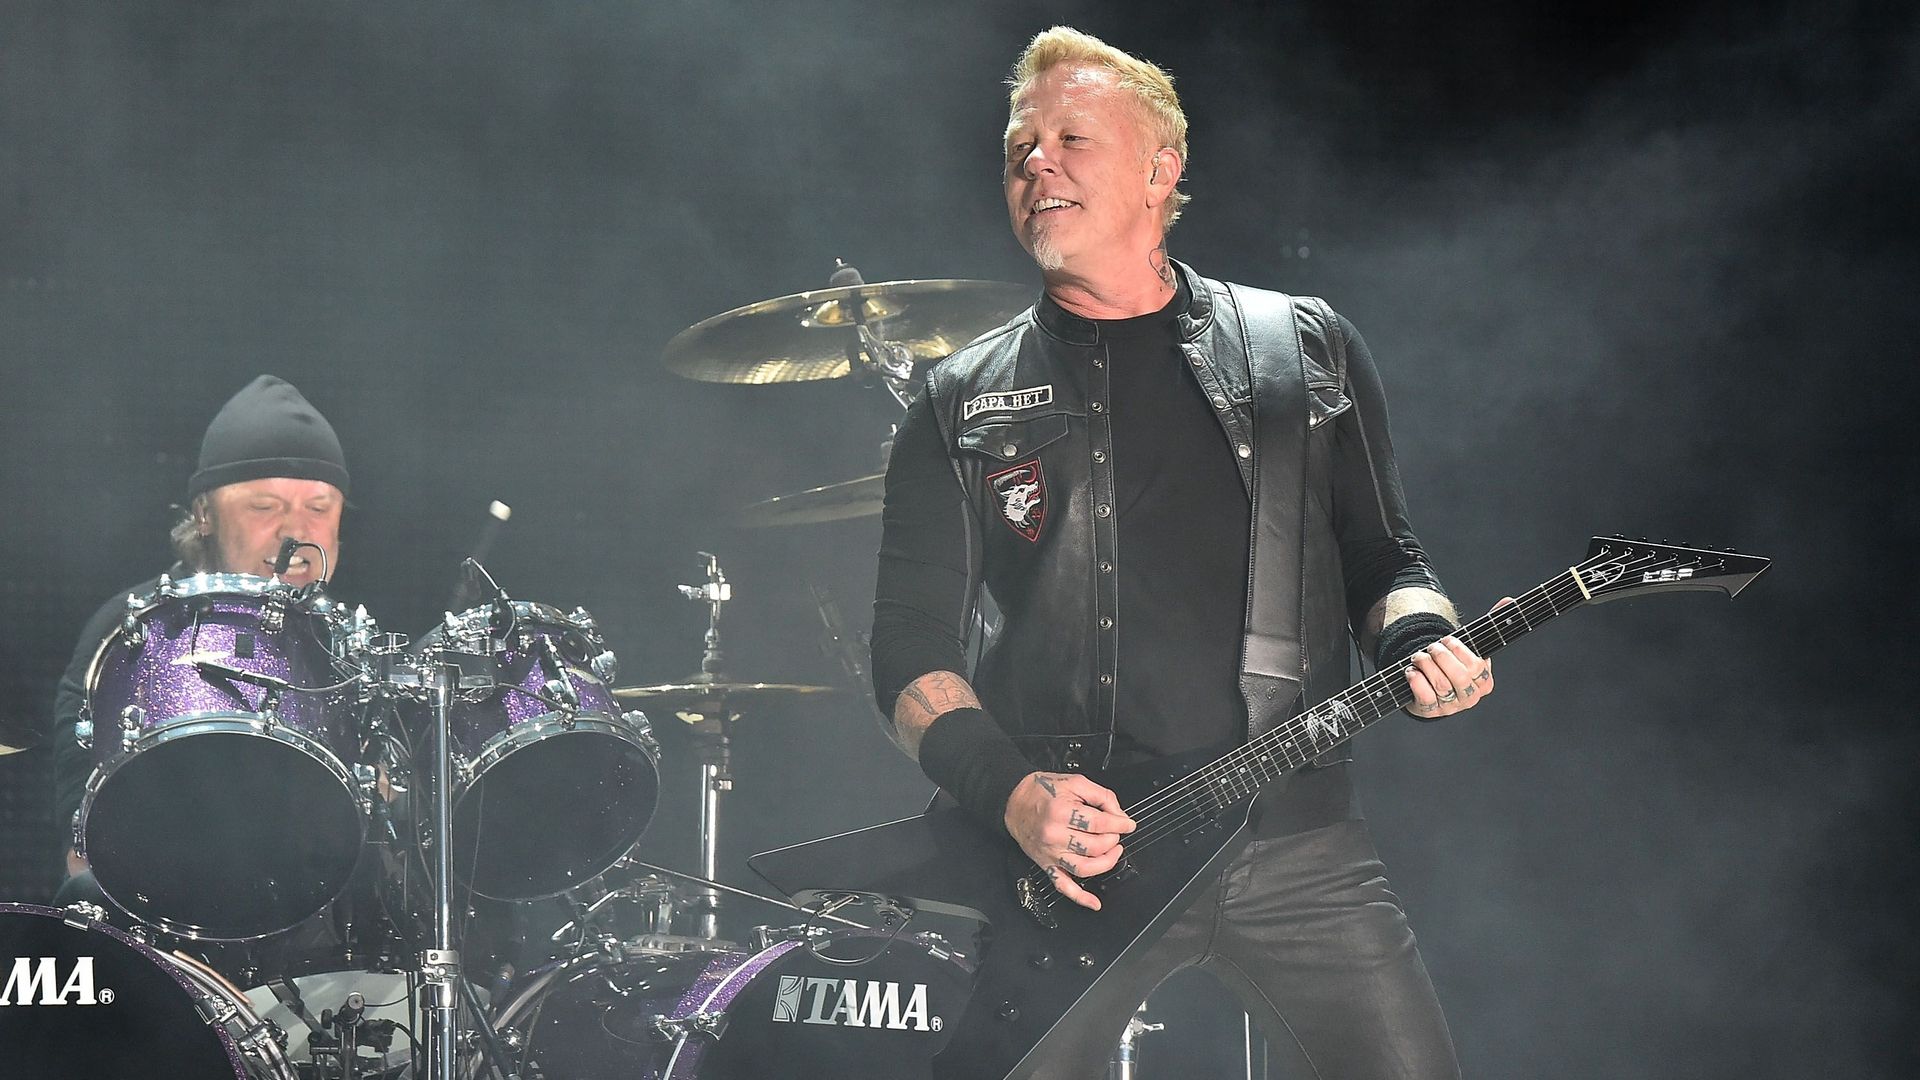 Metallica In Concert - East Rutherford, NJ